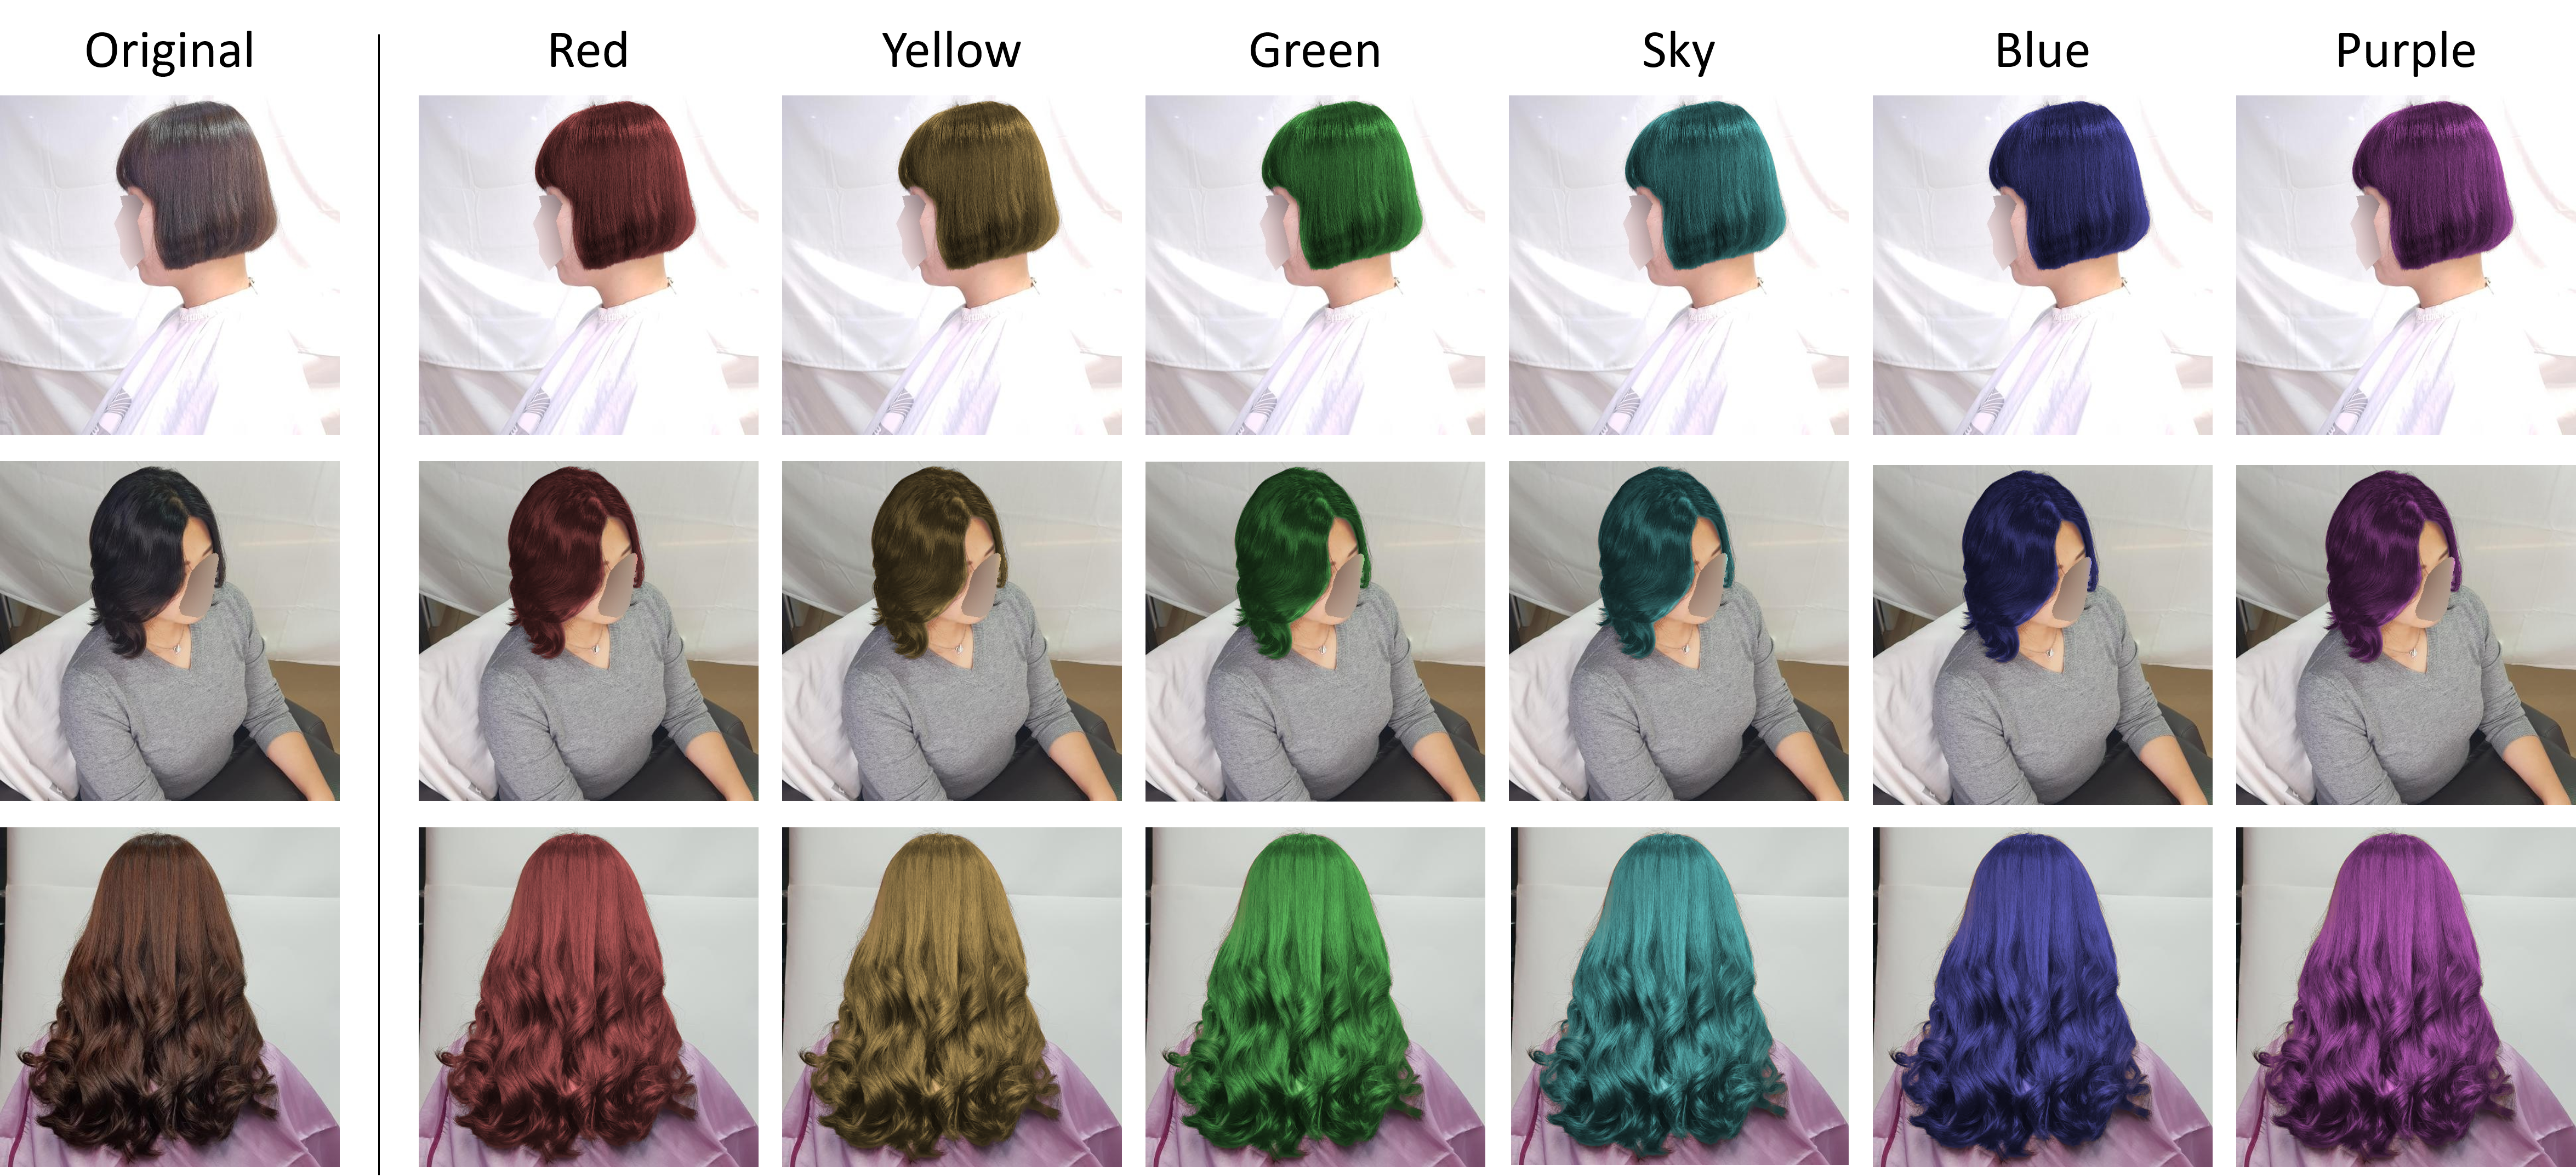 K-Hairstyle: A Large-scale Korean hairstyle dataset for virtual hair editing  and hairstyle classification